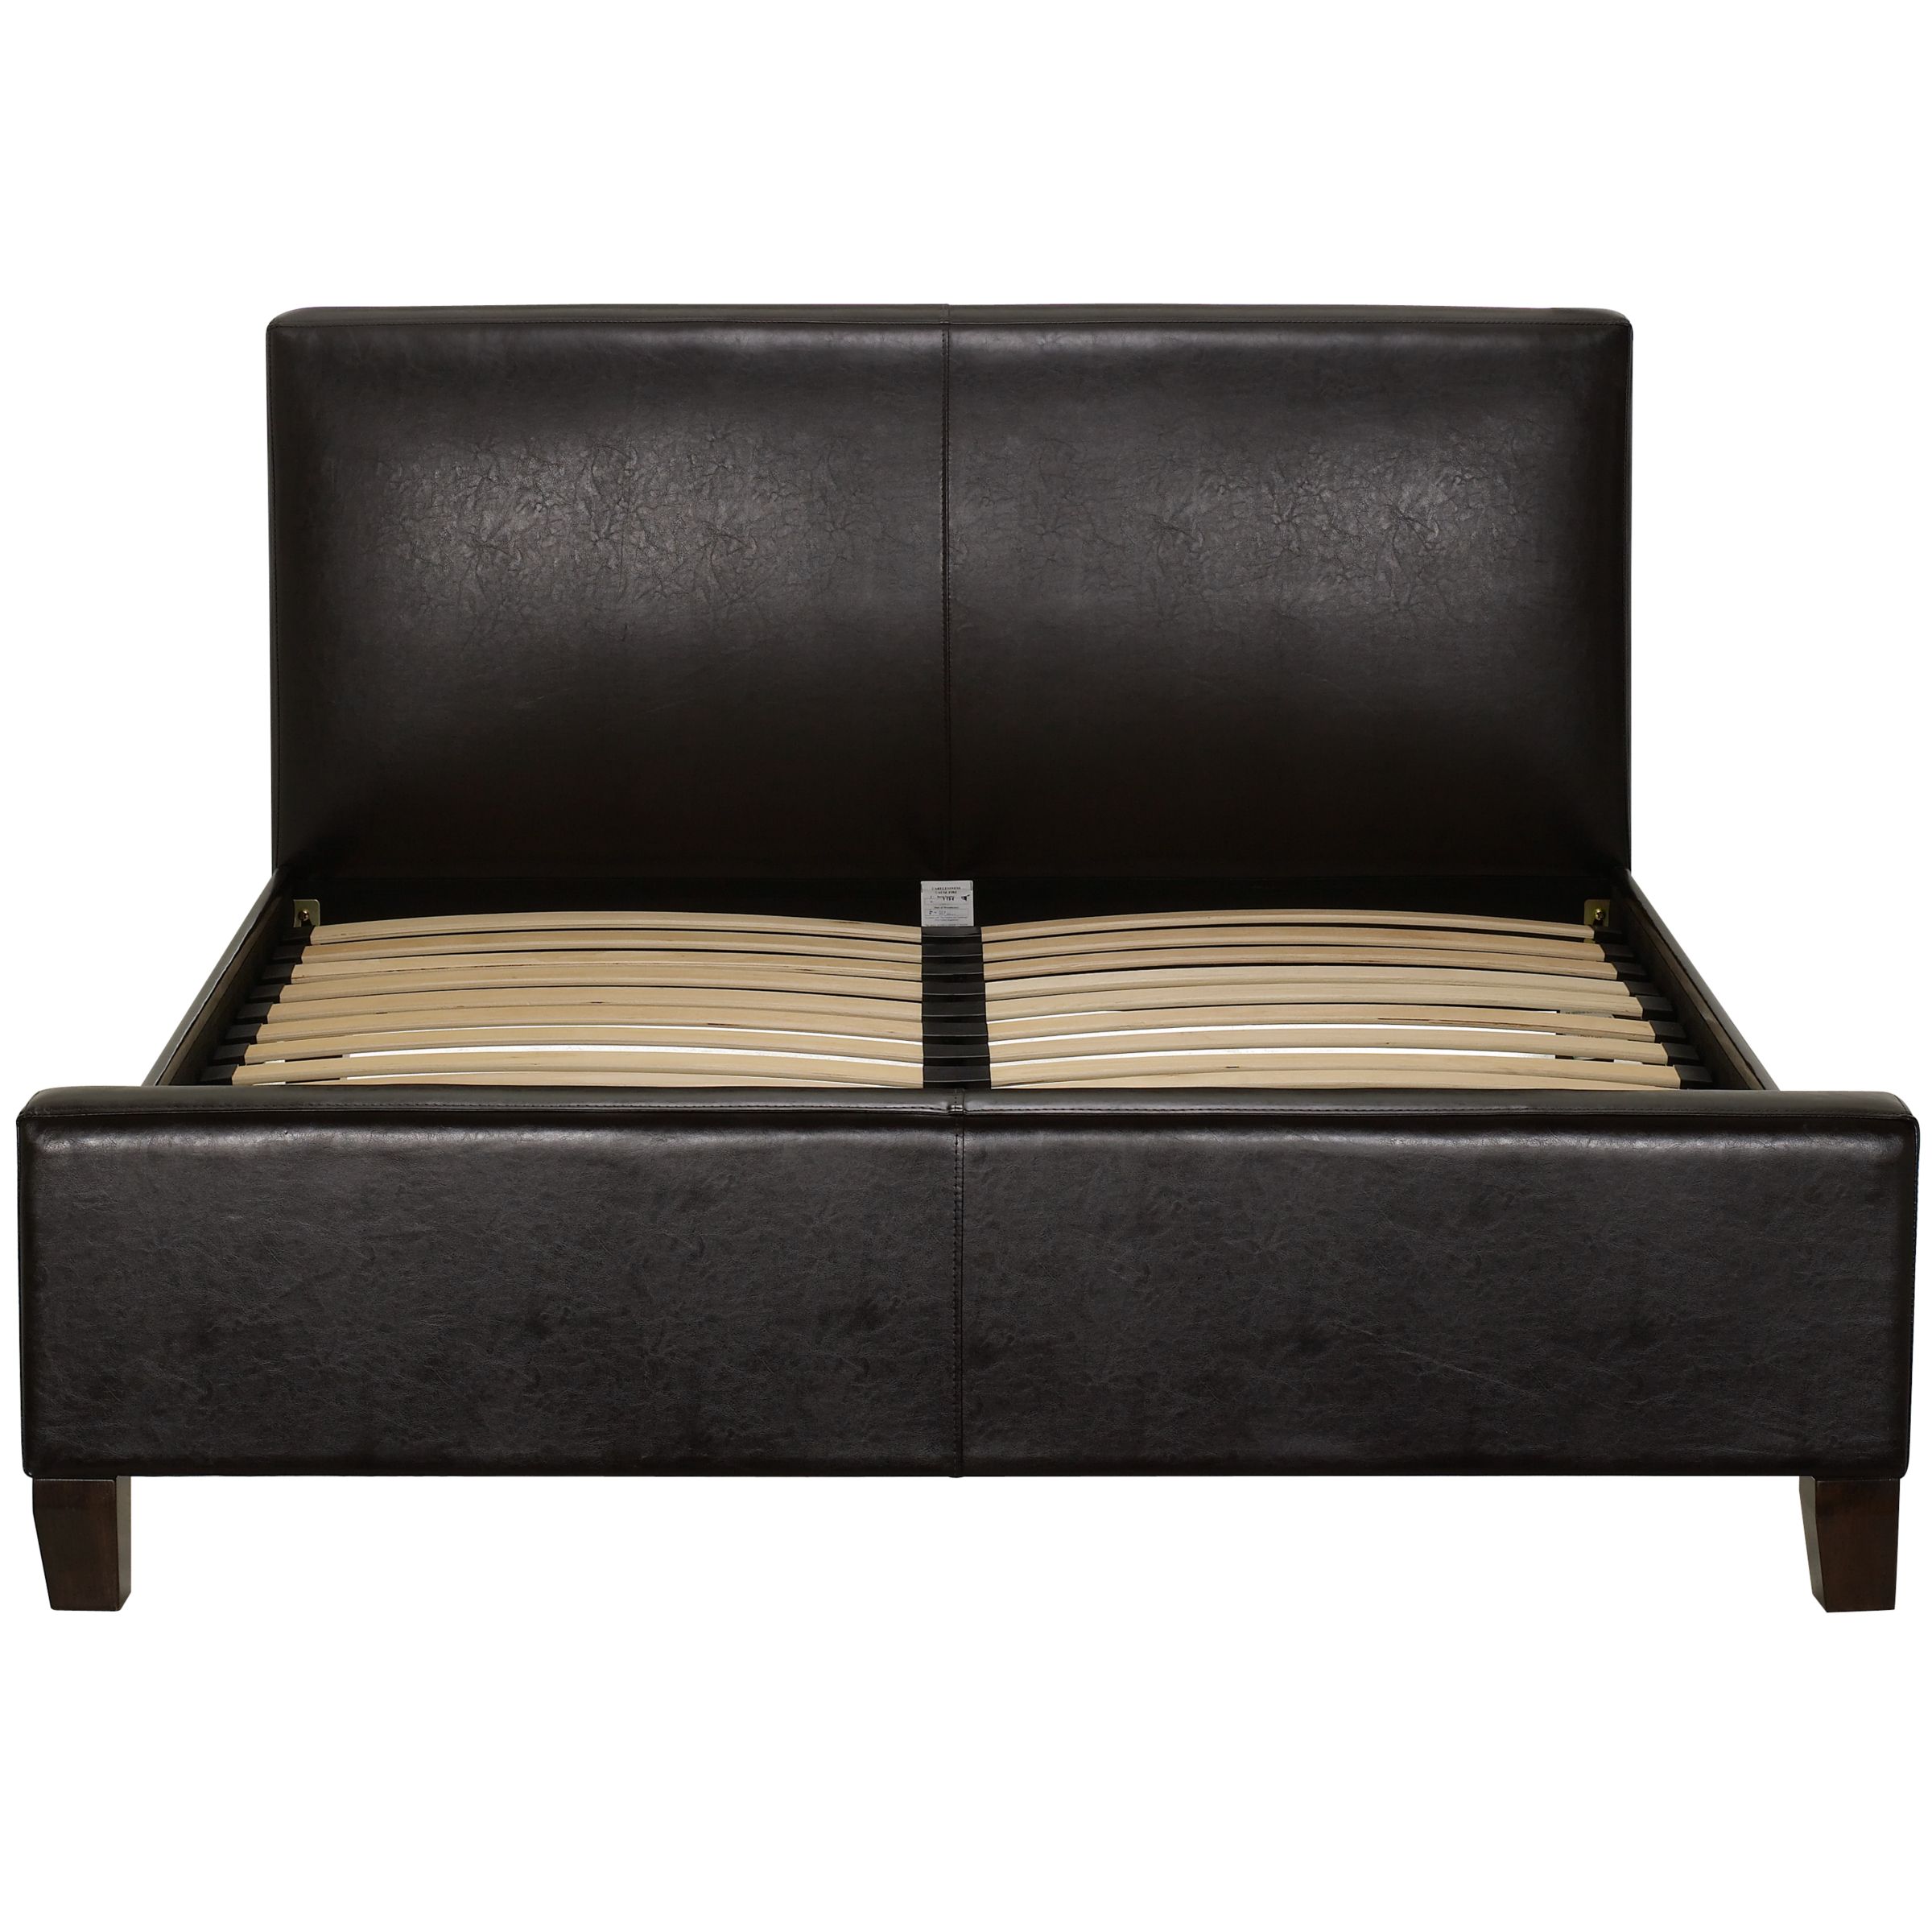 Calabria Faux Leather Bedstead, Chocolate, Single at JohnLewis